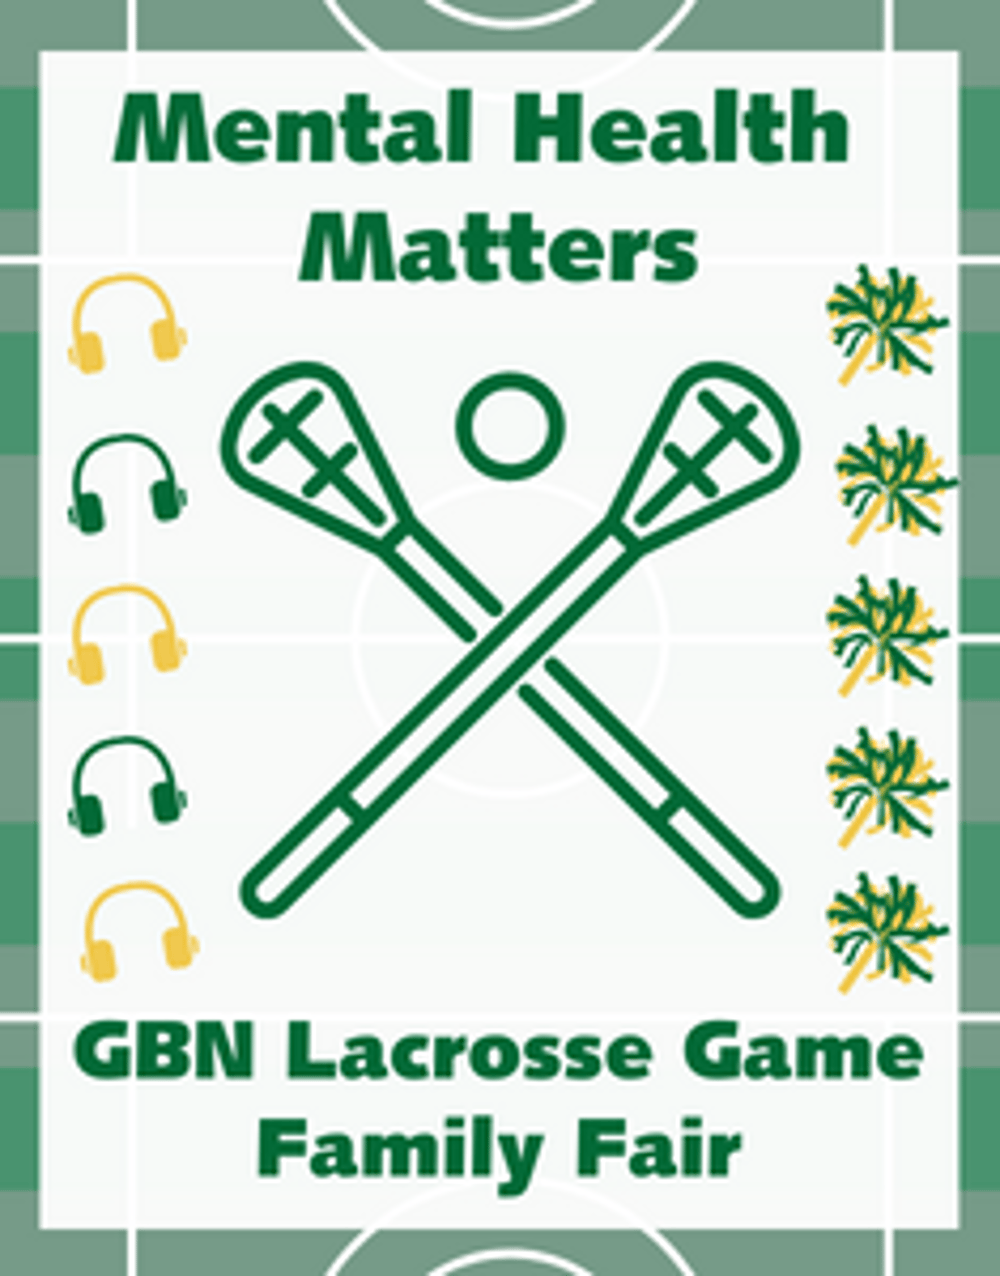 Mental Health Matters GBN Lacrosse Game and Family Fair
